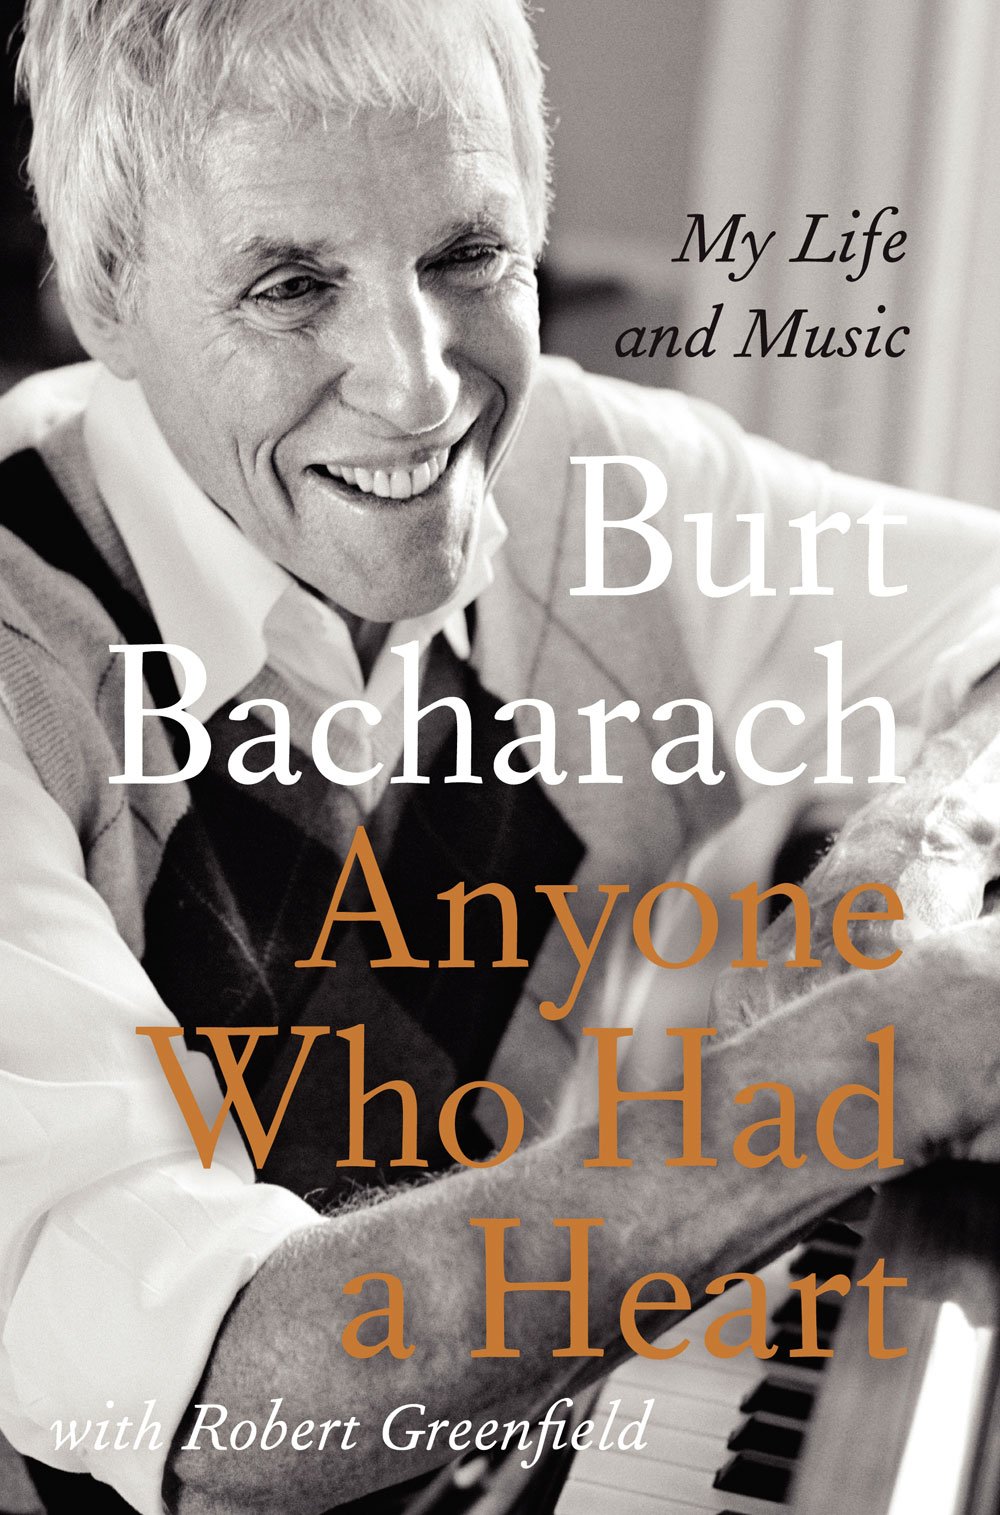 Burt Bacharach: 'Never Be Afraid Of Something That You Can Whistle'